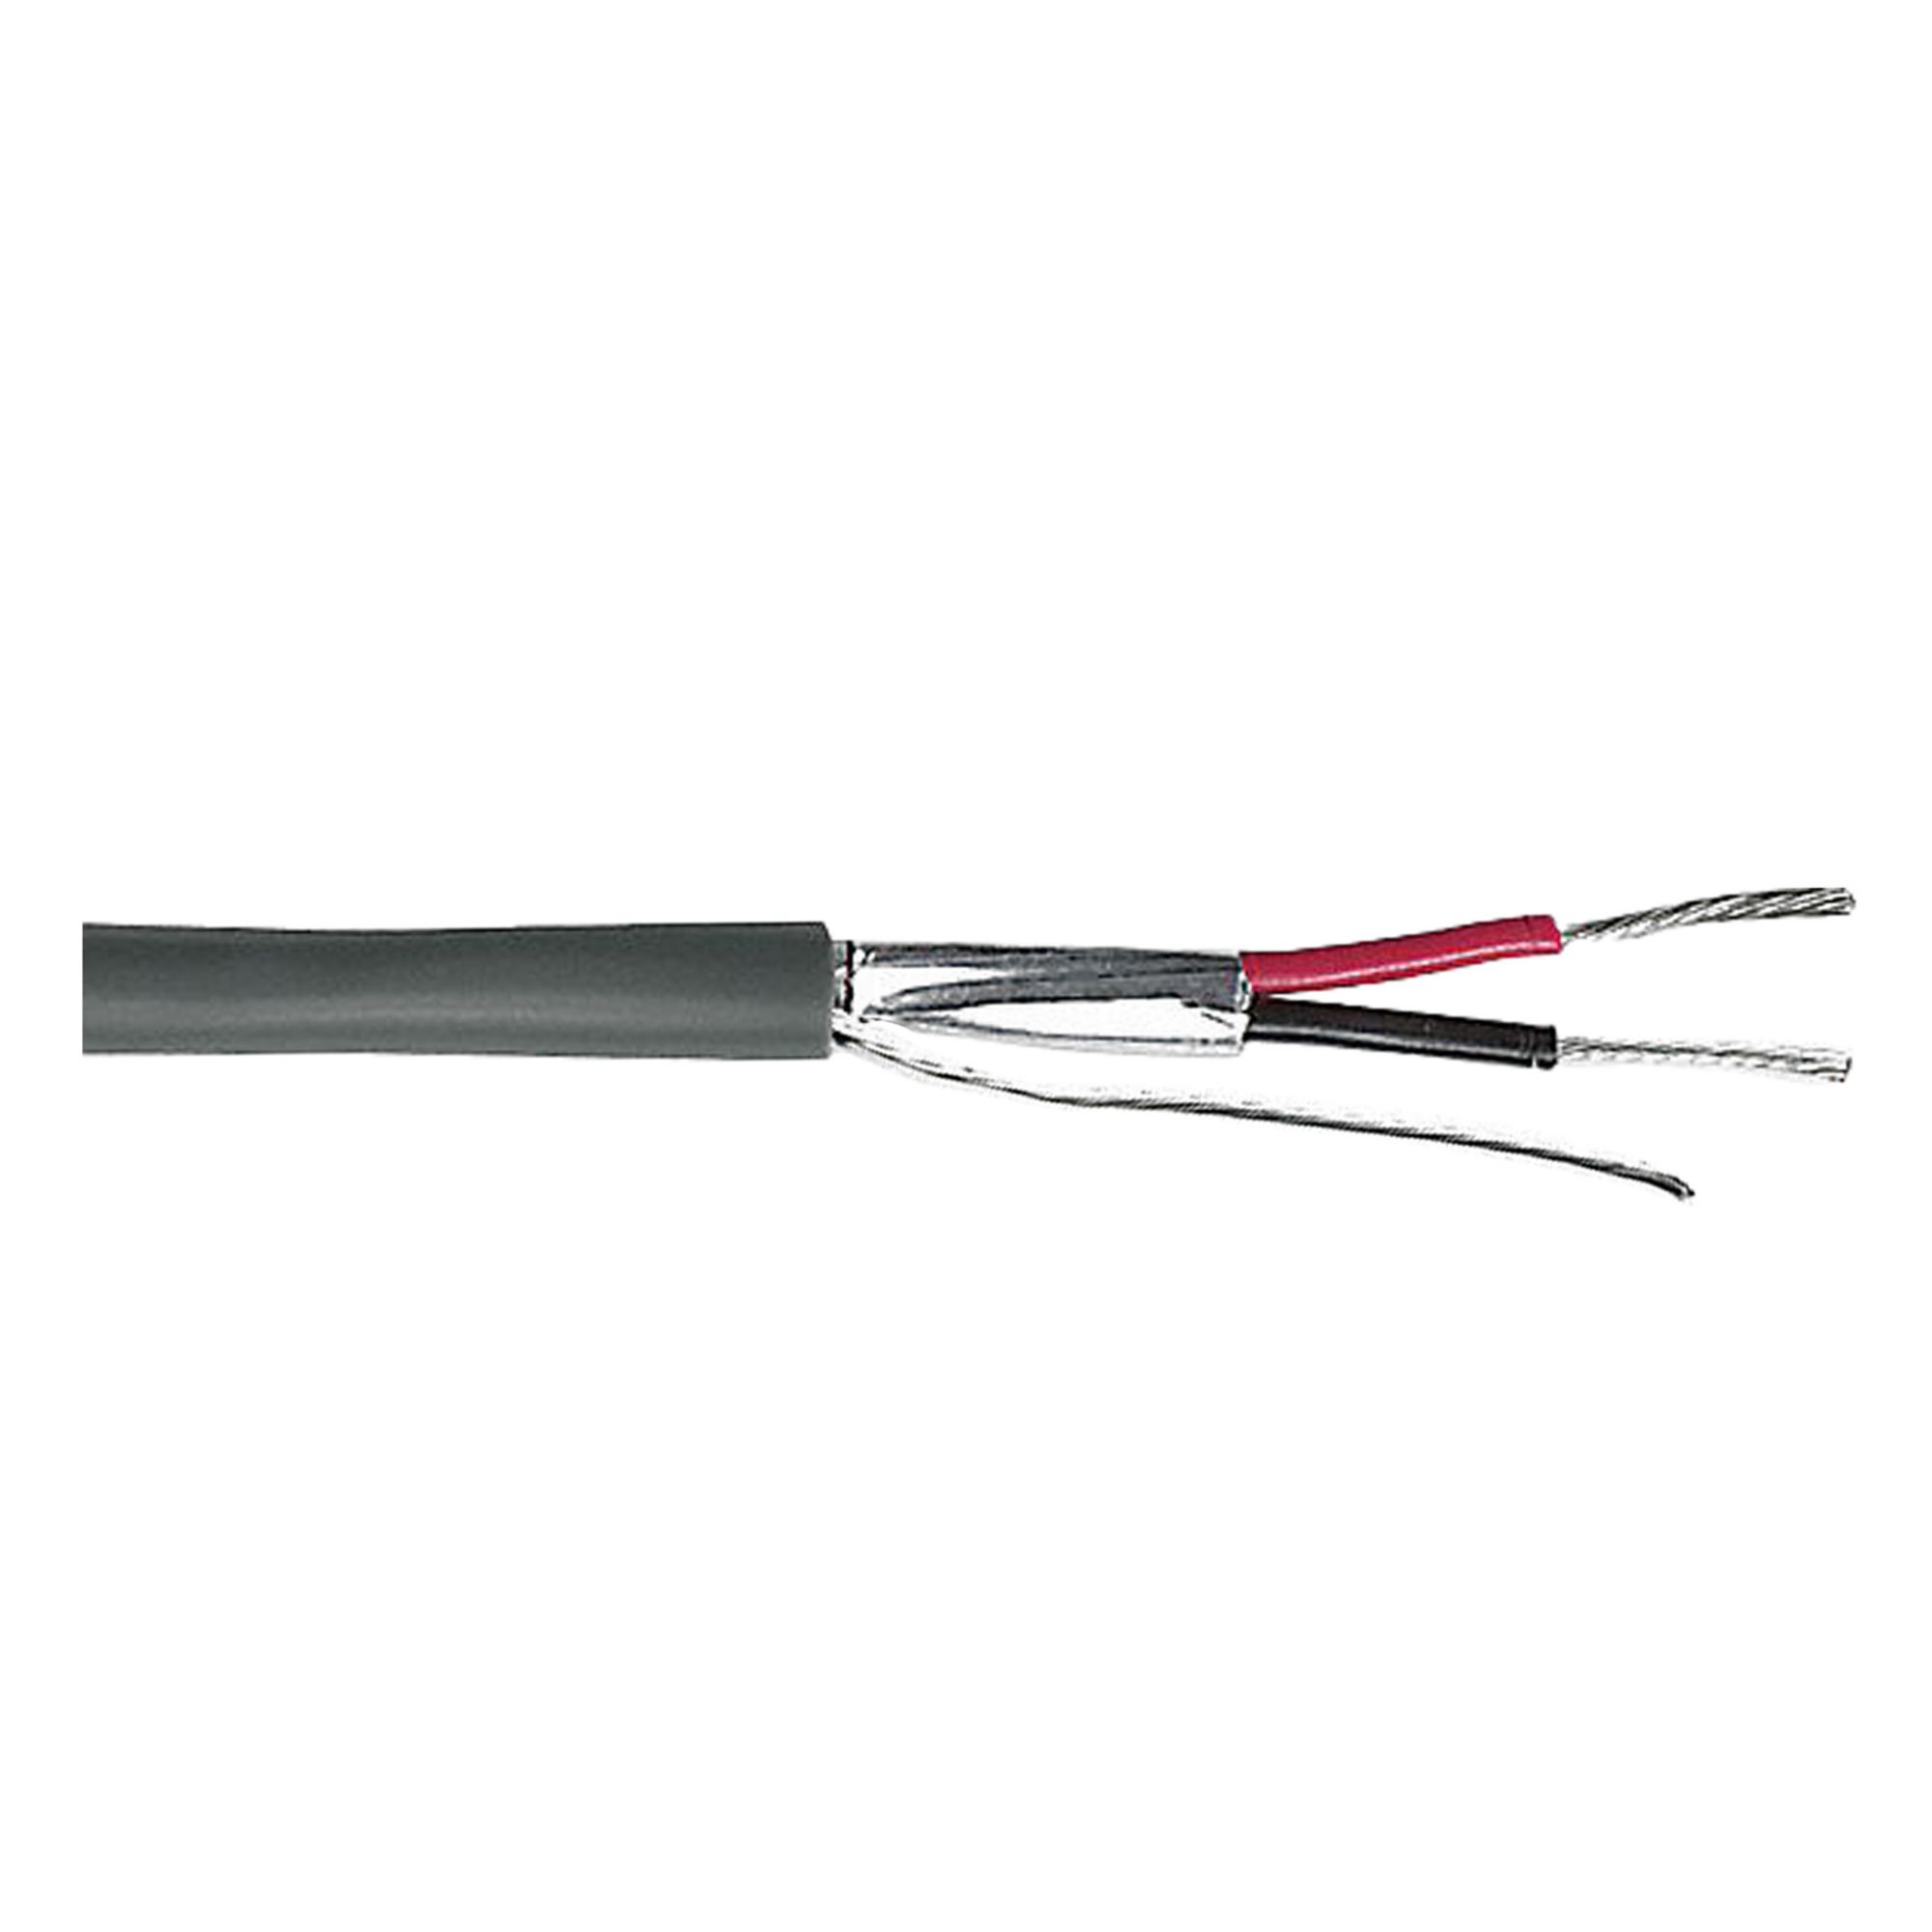 Electrical Wires, Cables & Cordsets - Grainger Industrial Supply